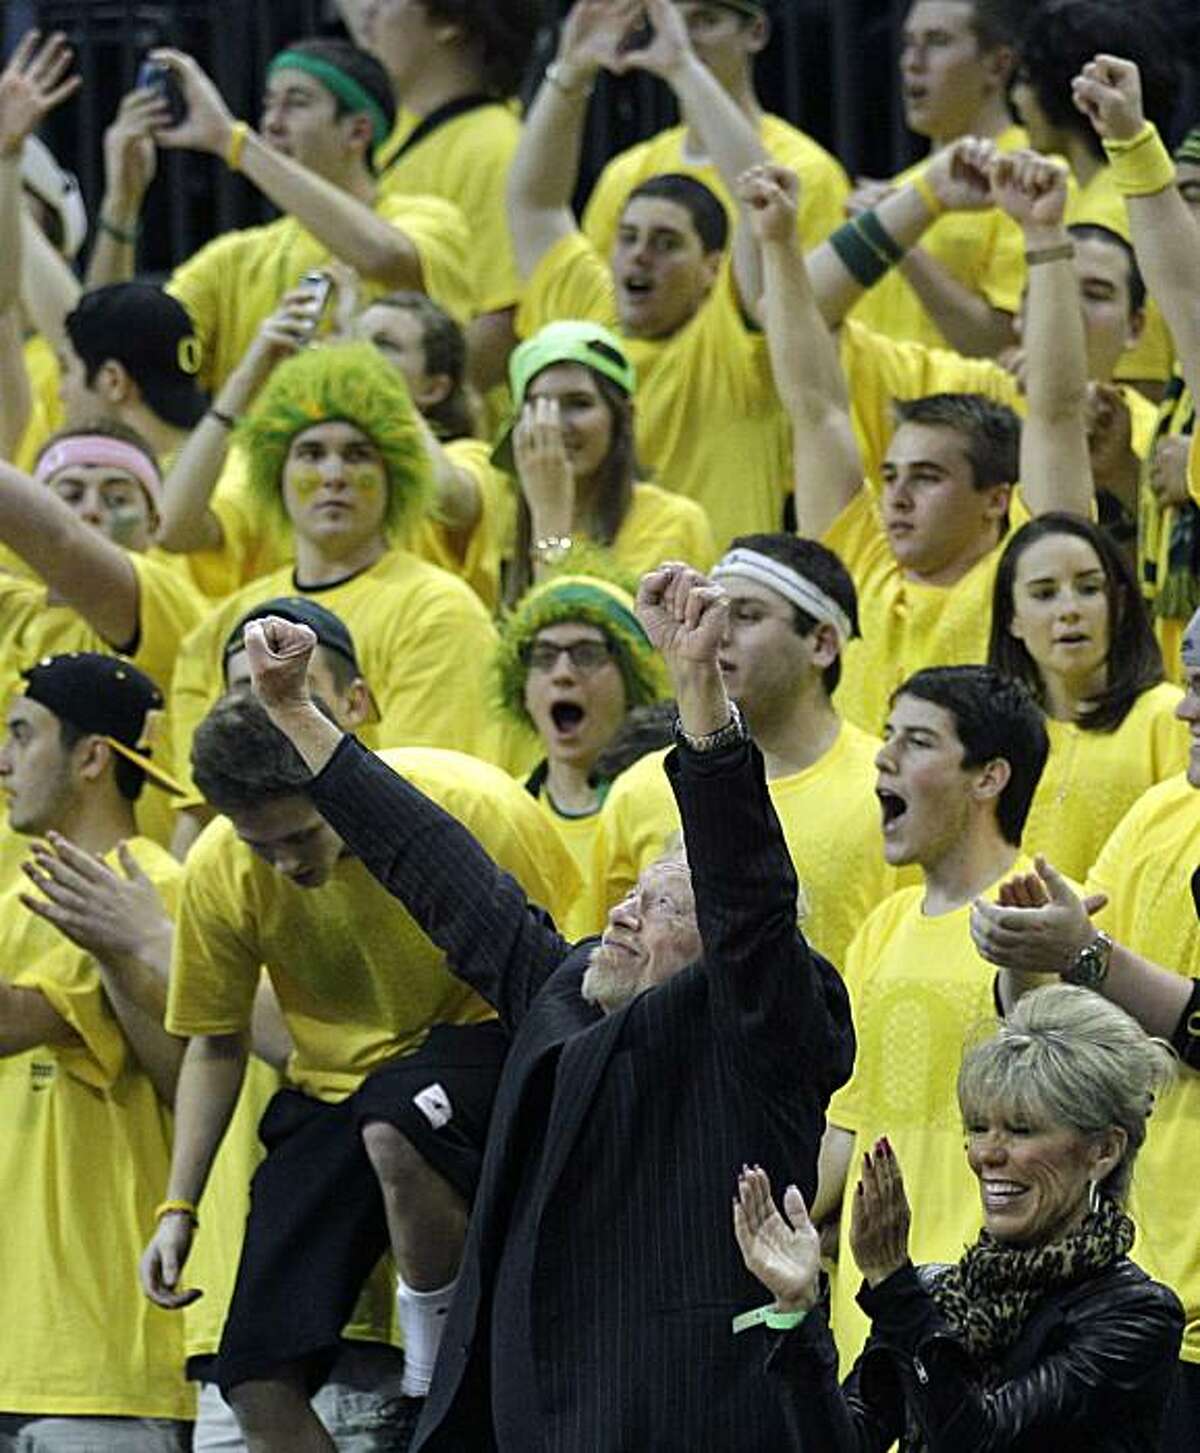 Nike co-founder and Ducks benefactor Phil Knight and his wife, Penny, celebrate Oregon's victory over Southern California during an NCAA basketball game Thursday, Jan. 13, 2011, in Eugene, Ore. Oregon defeated USC 68-62. (AP Photo/Rick Bowmer)